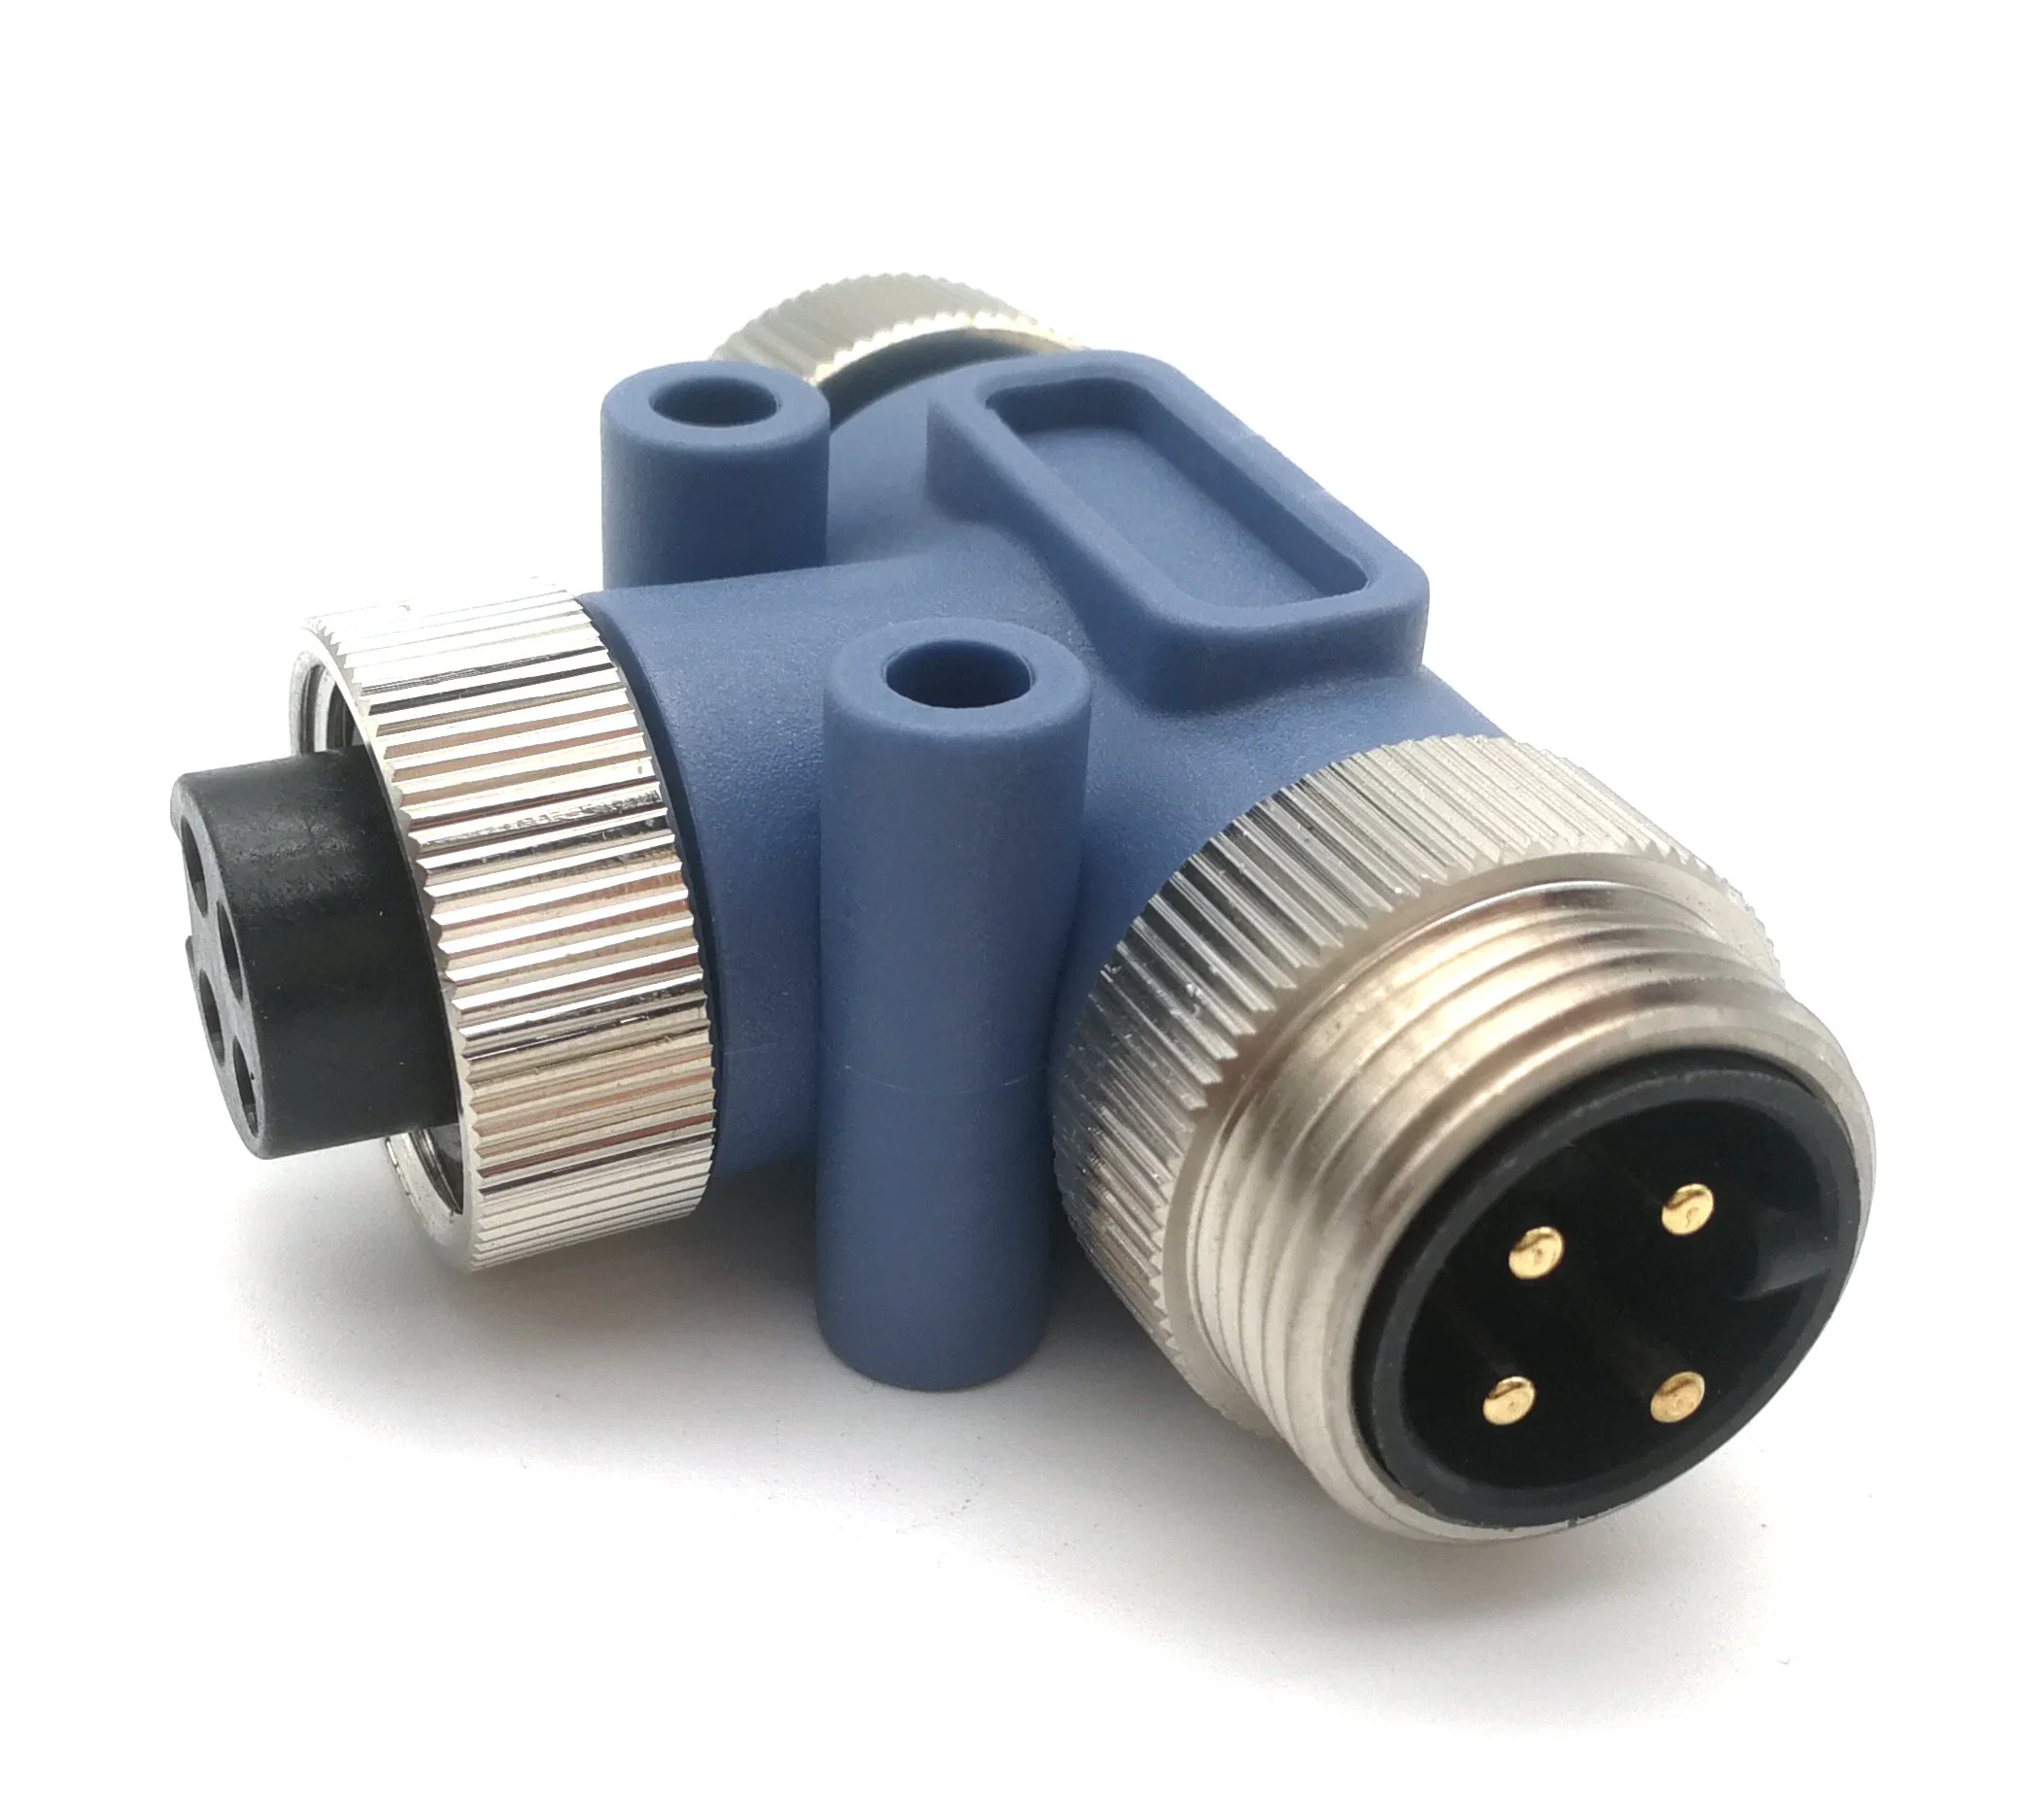 Svlec IP67 T Connector 4 Pole 5 Pole 7/8 Female to Male and Female 3 Ways Connectors for Industrial Converter